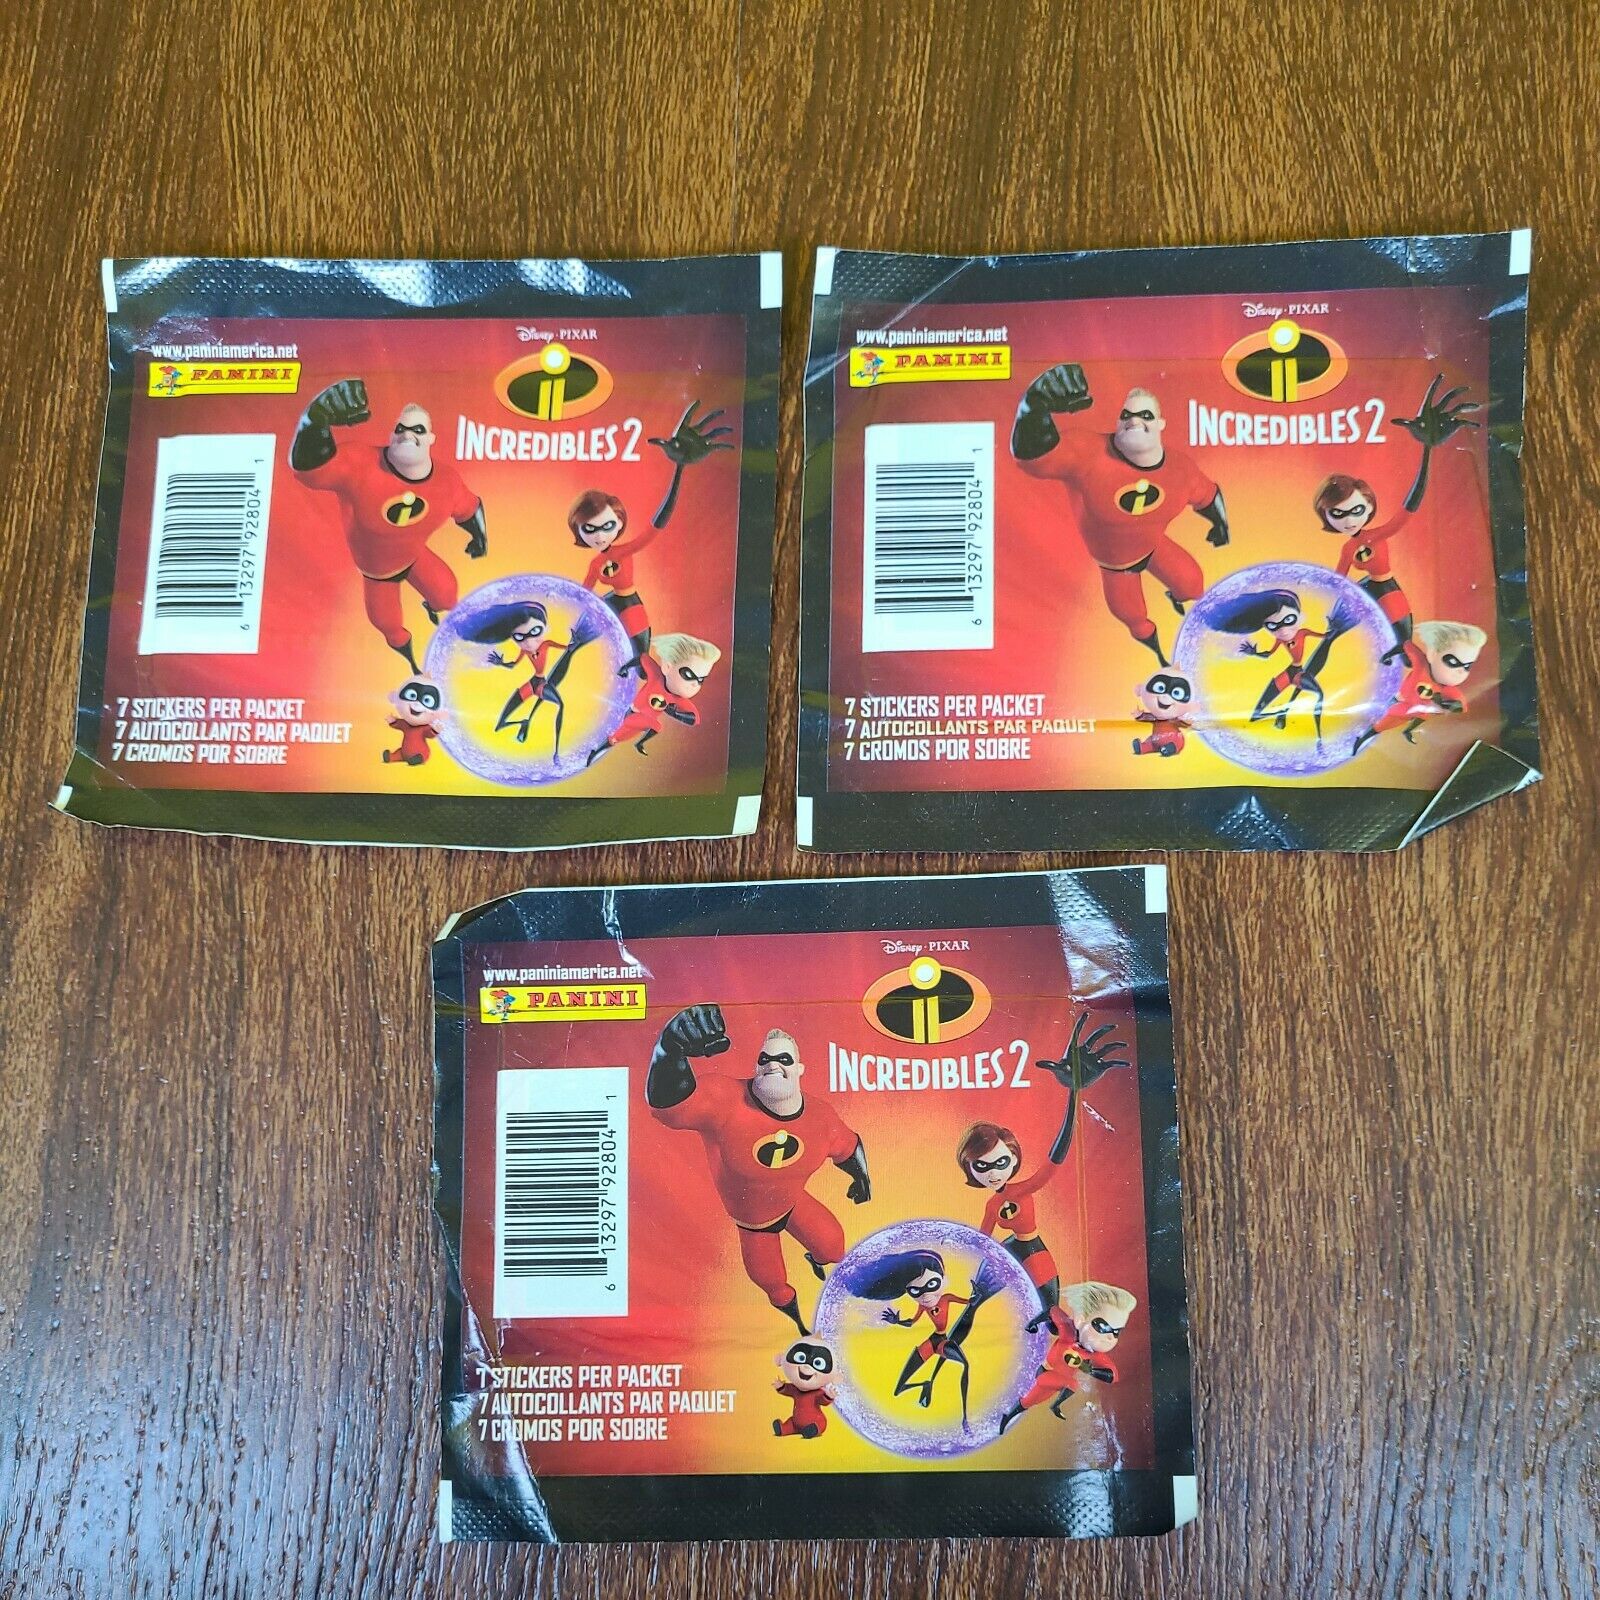 2018 Panini Incredibles 2 Album Sticker Trading Cards, Two 7 Sticker Card Packs